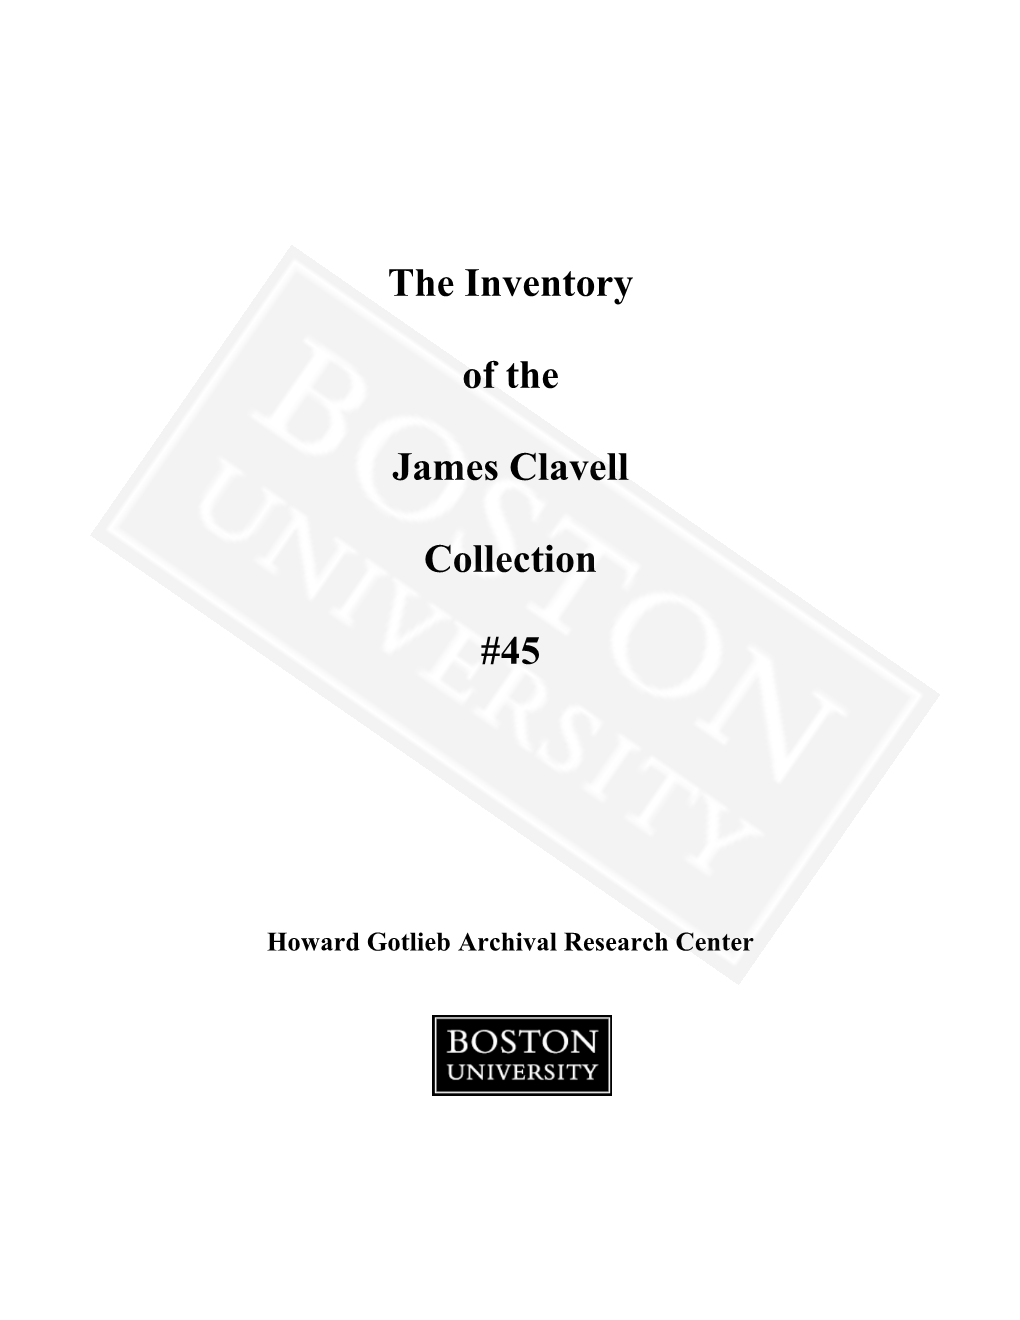 The Inventory of the James Clavell Collection